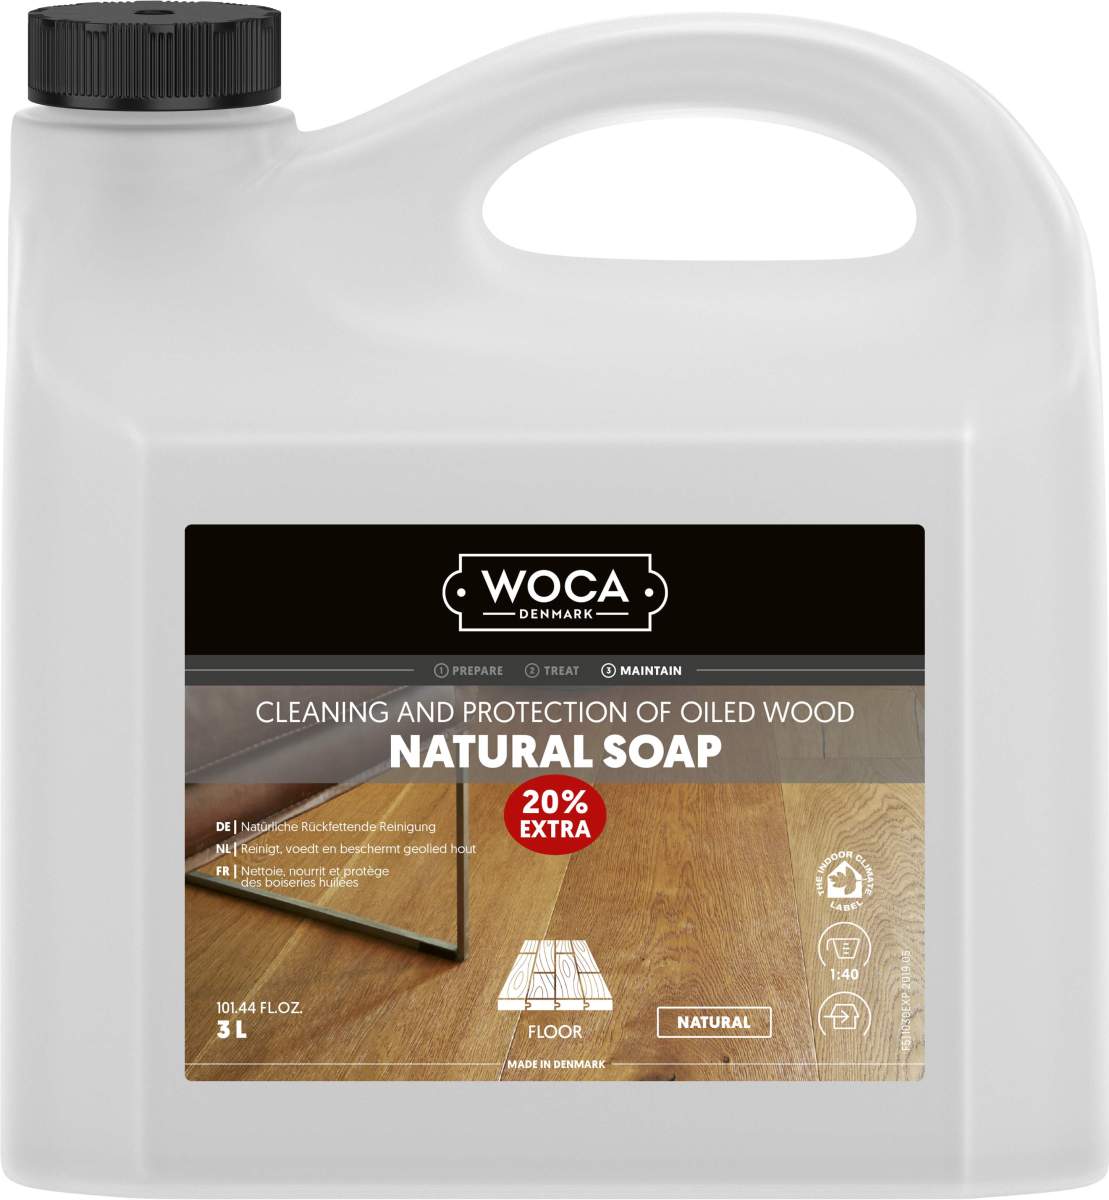 WOCA Holzbodenseife Natur Natural Soap 3 Liter